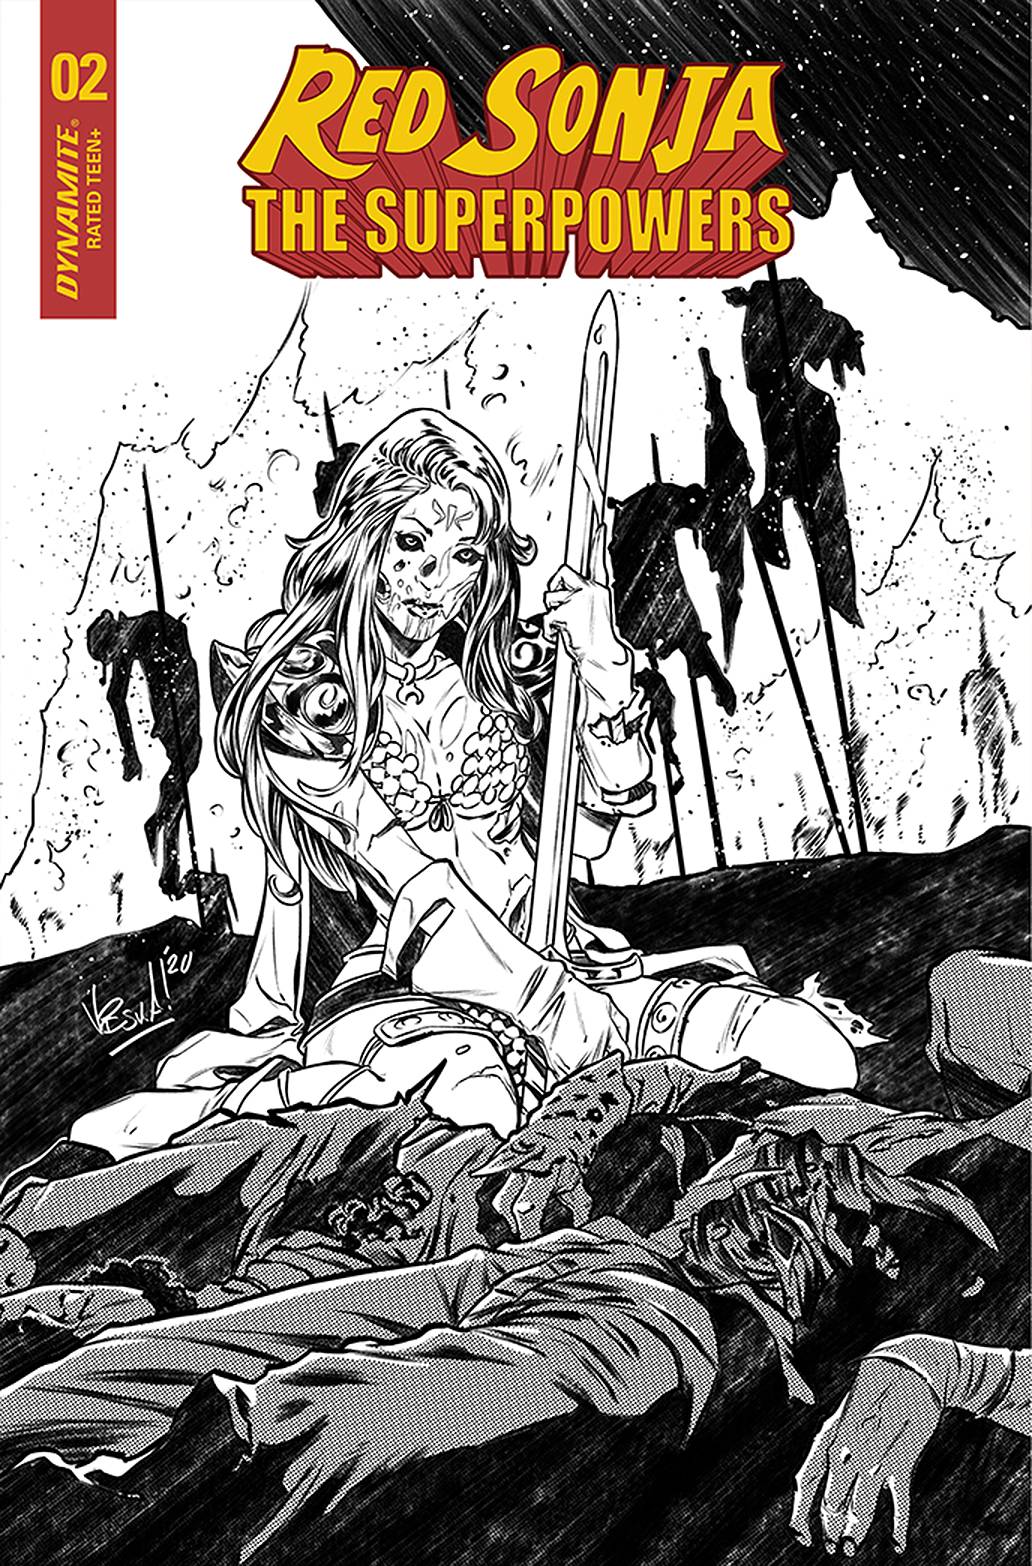 (RATIO) RED SONJA THE SUPERPOWERS #2 FEDERICI B&W INCV (1:30) (02/10/2021)